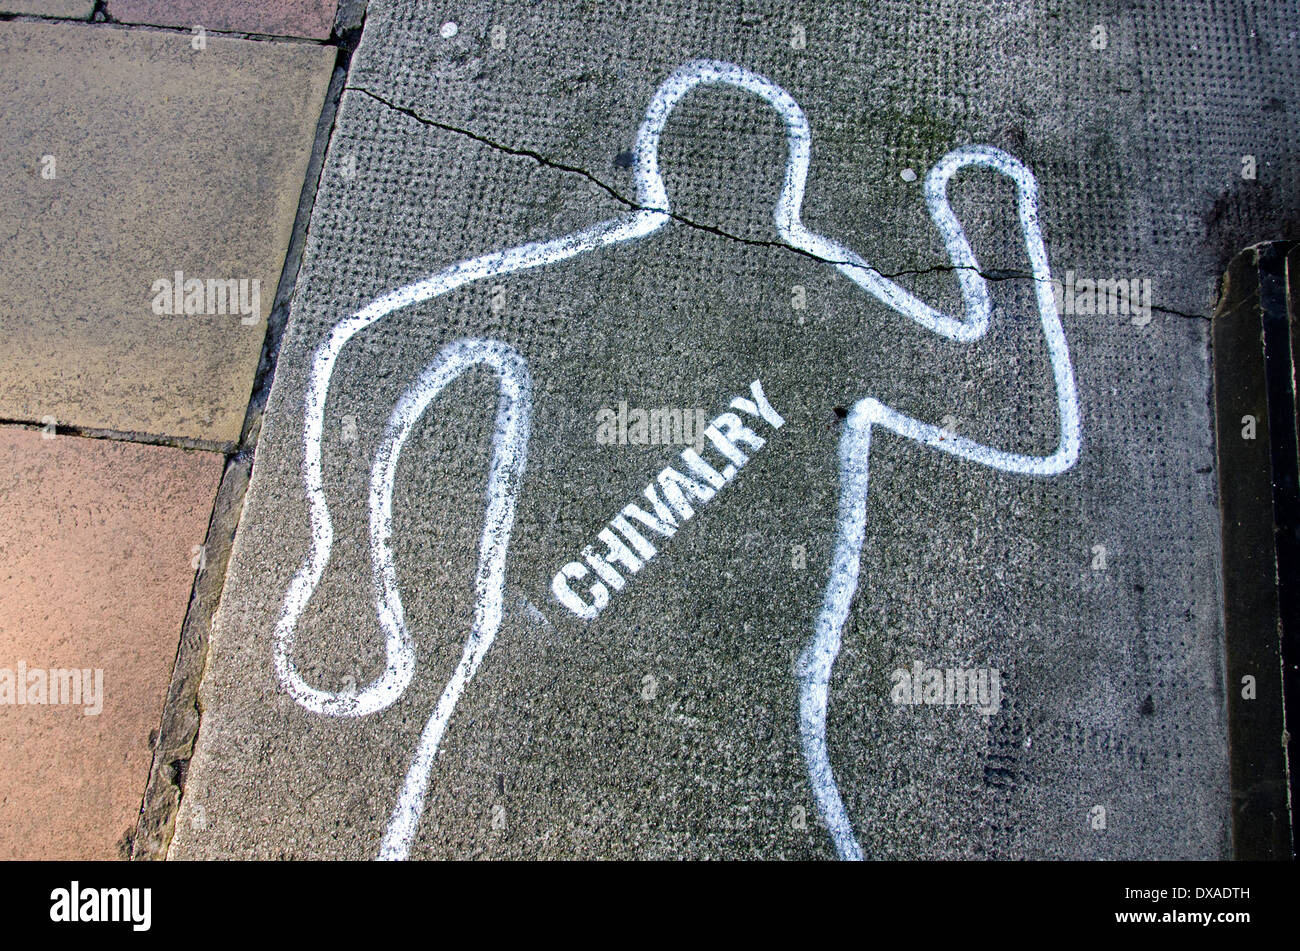 Chivalry is dead - the outline of a body and the word 'chivalry' drawn on the pavement. Stock Photo